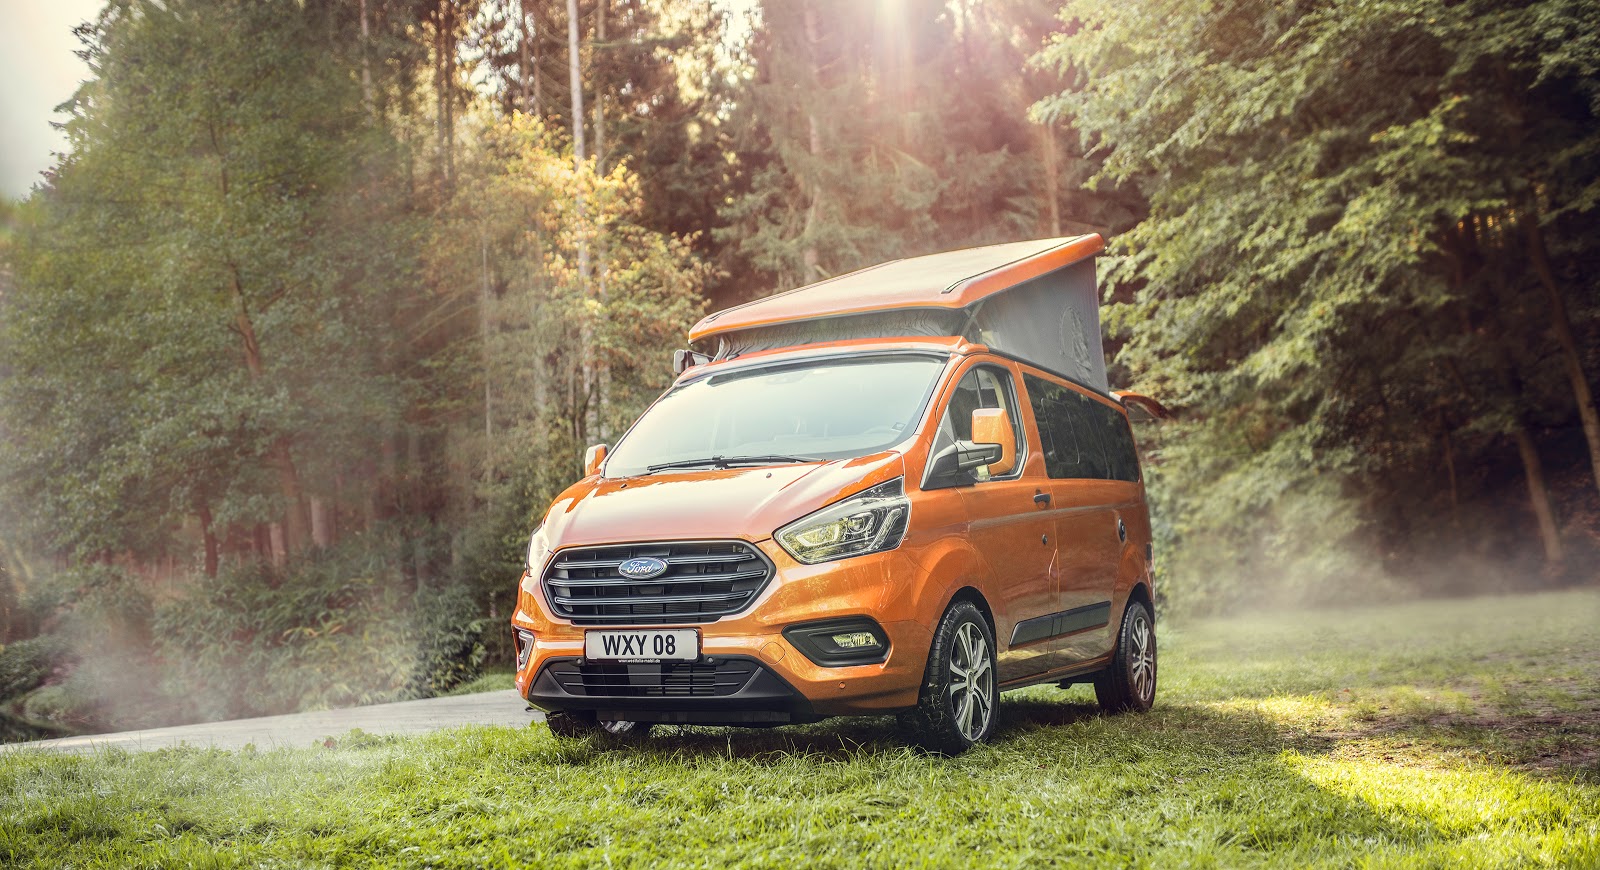 Discover New Ford Transit Nugget